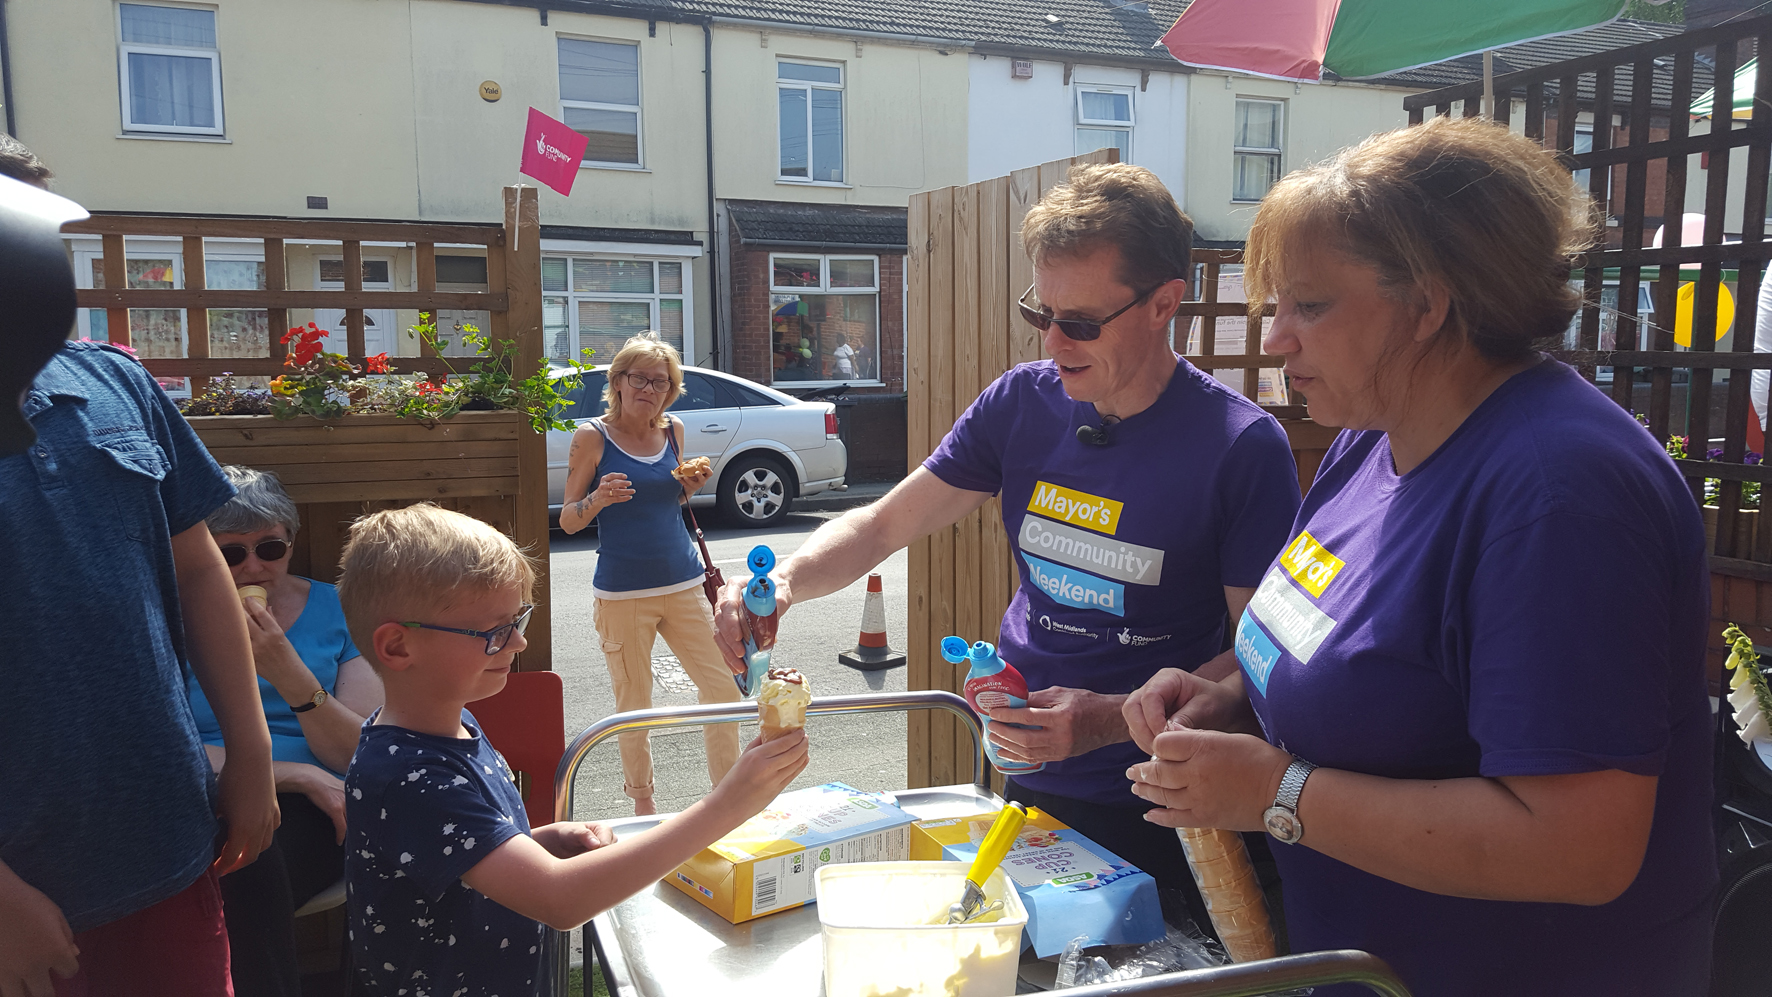 Mayor of the West Midlands Andy Street serves a youngster ice-cream with chocolate sauce at the Community Barbecue Build and Plant event at the Stratton Street Community Centre, Wolverhampton